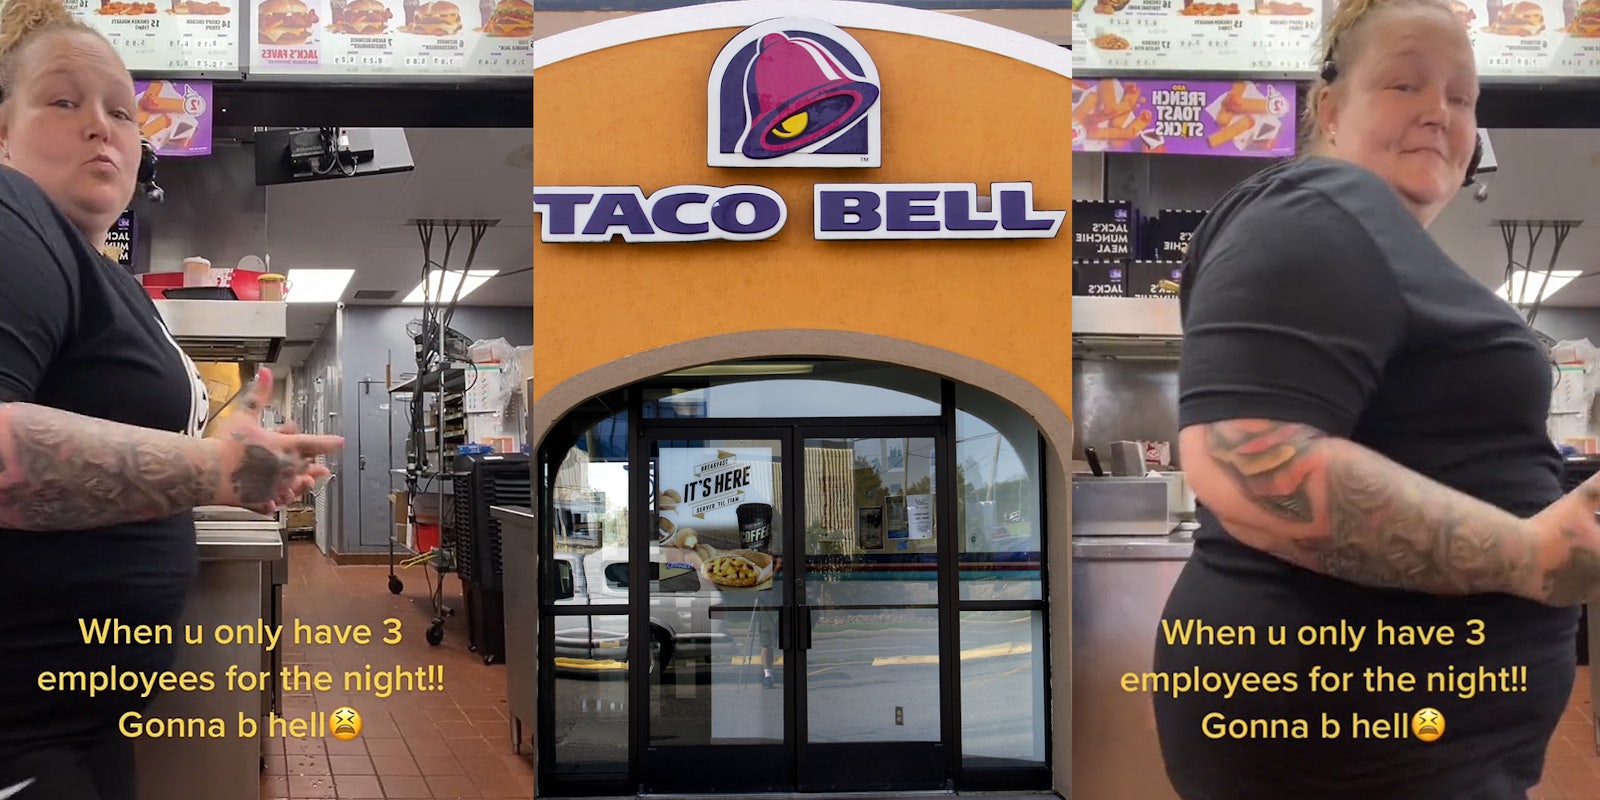 Taco Bell employee in kitchen with hand out caption 'When u only have 3 employees for the night!! Gonna b hell' (l) Taco Bell restaurant front doors with sign (c) Taco Bell employee in kitchen with hand out dancing caption 'When u only have 3 employees for the night!! Gonna b hell' (r)